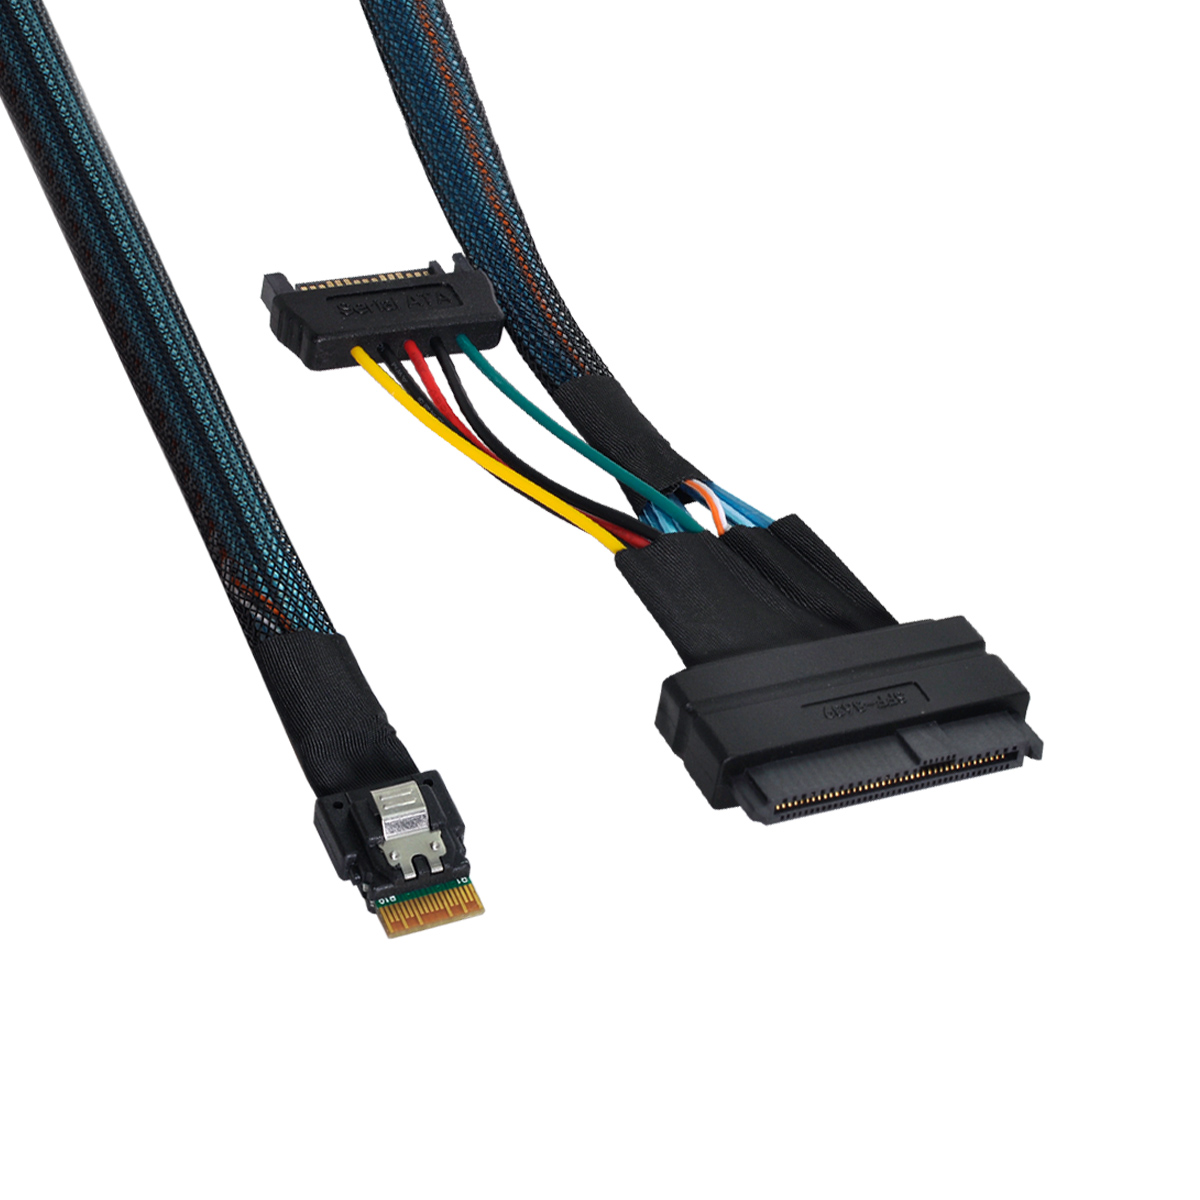 CableDeconn SFF 8654 4i Slimsas to SFF 8639 Hard Disk SSD Cable NVME U.2  with 15 Pin SATA Power Cable G0206-Slimsas SFF8654-CableDeconn